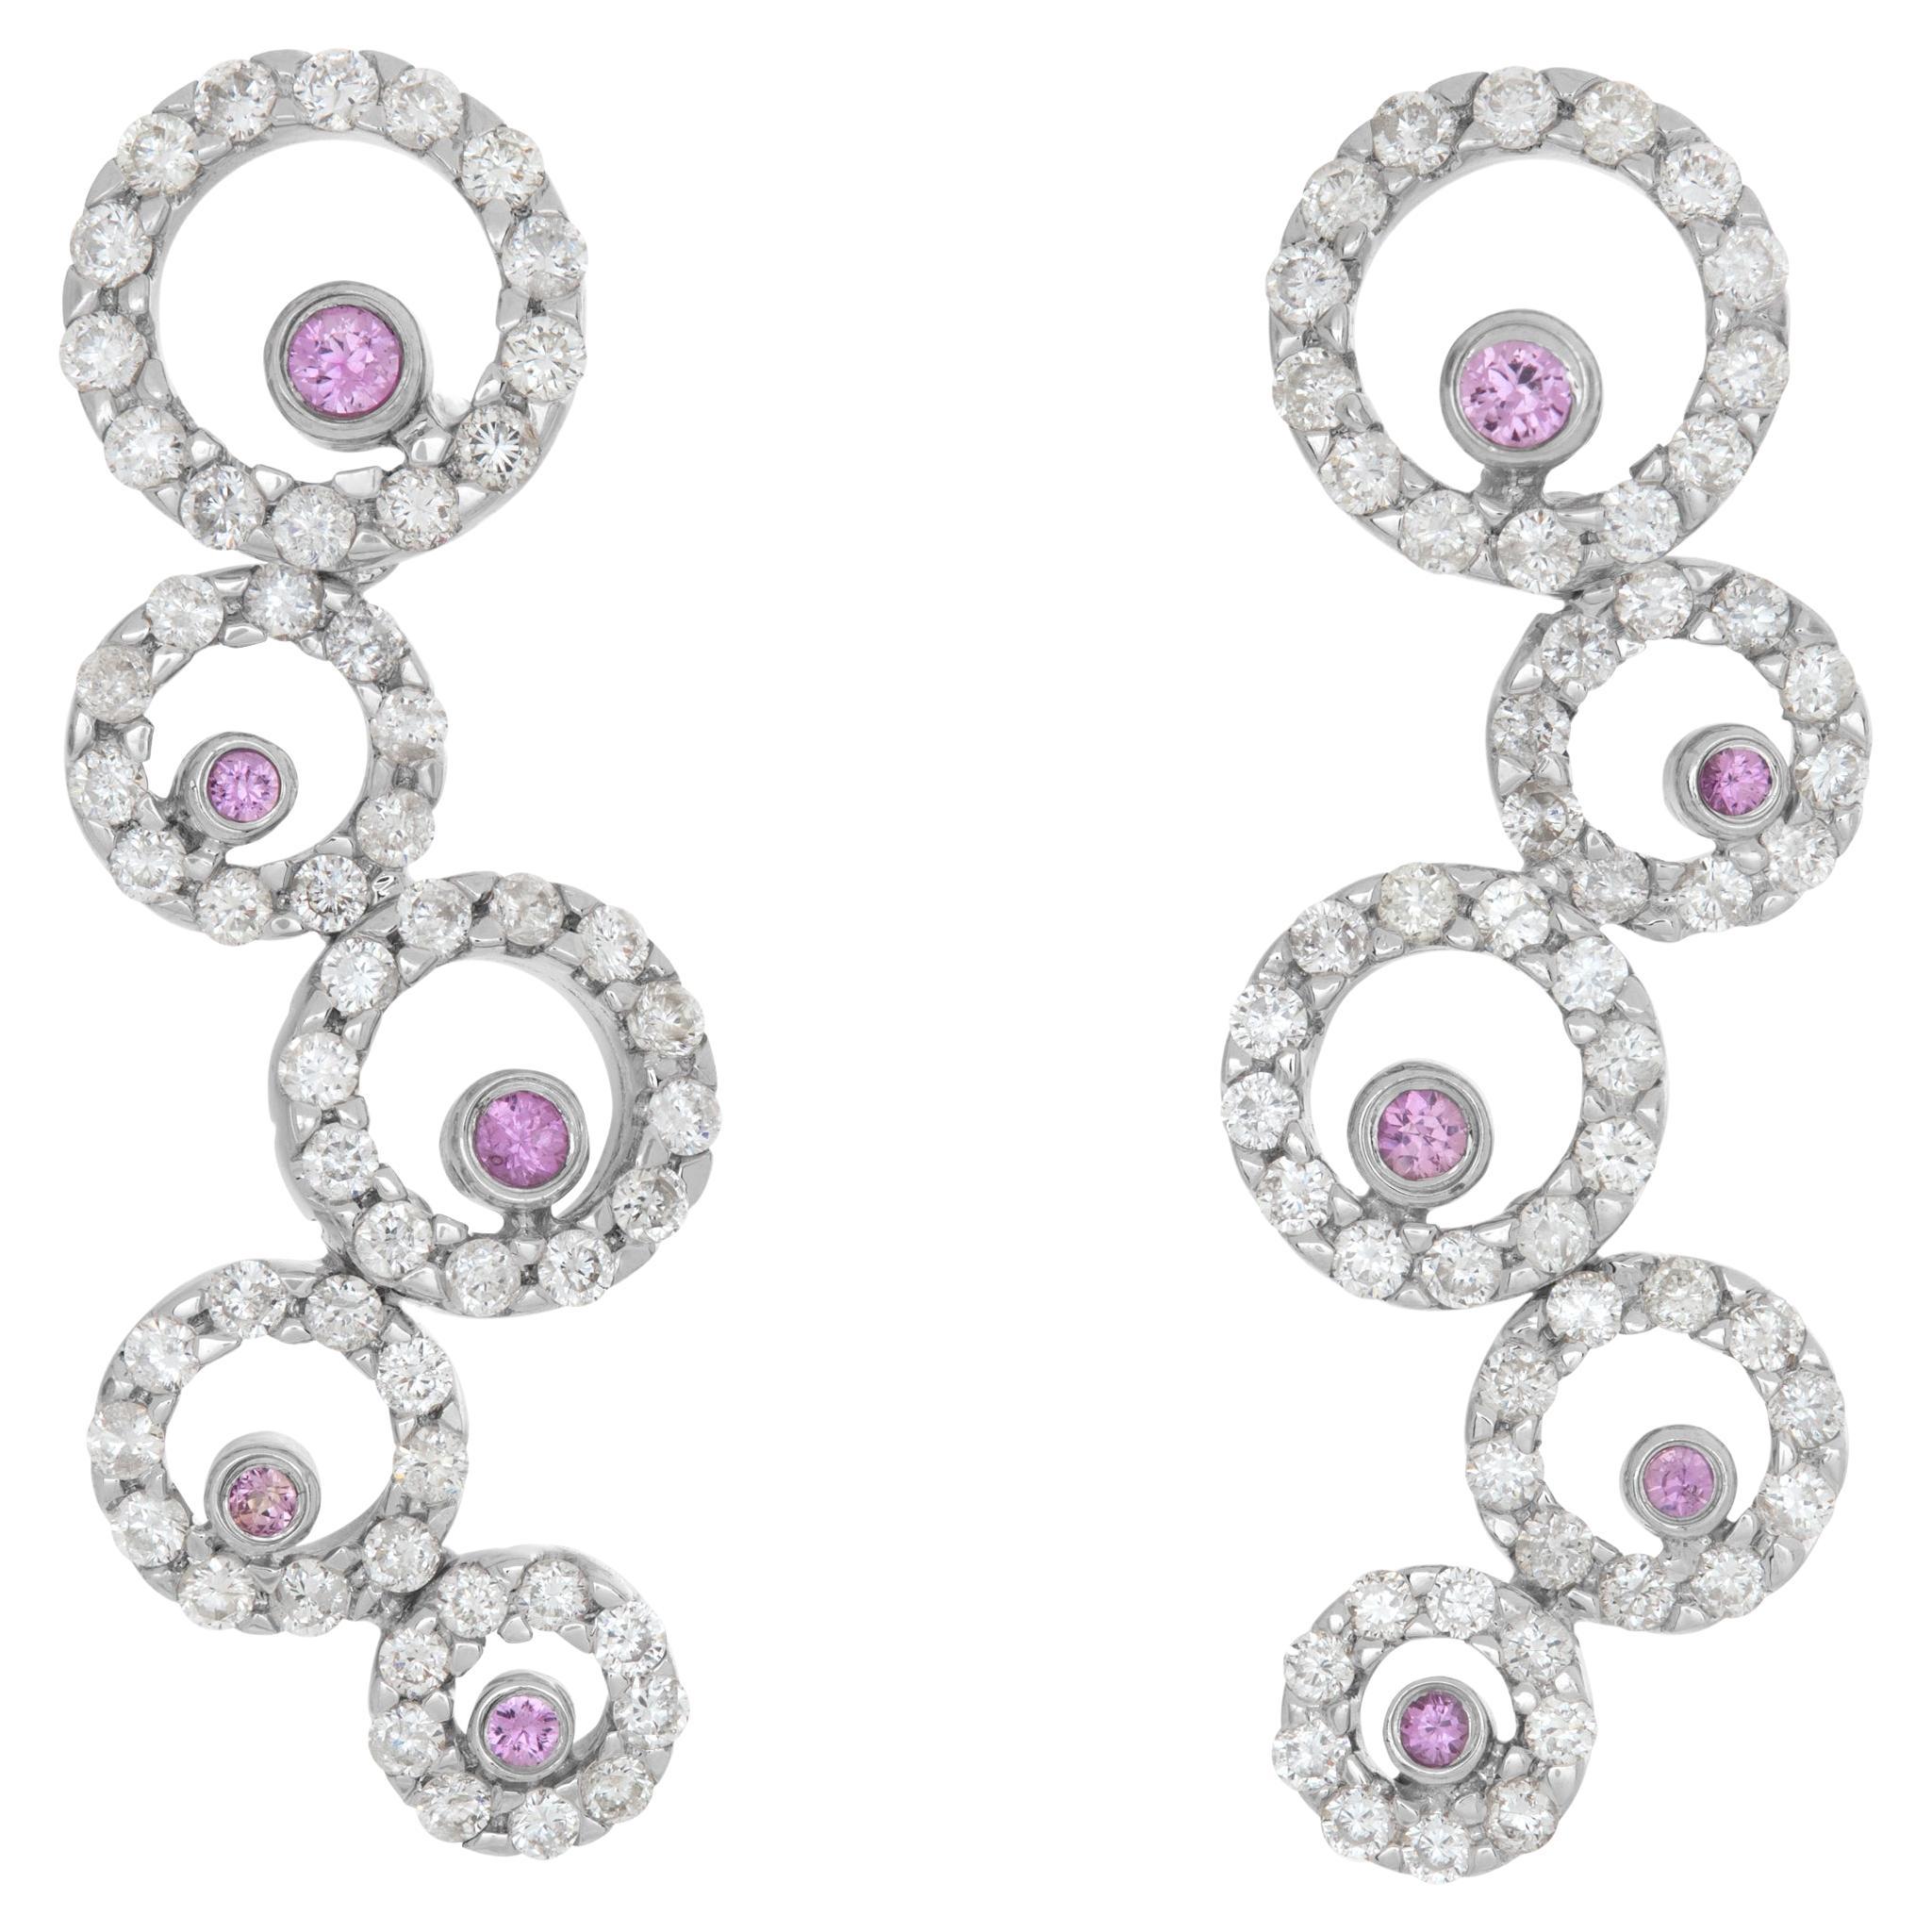 Dangling Diamonds Halo Circle 14k White Gold Earrings with Round Cut